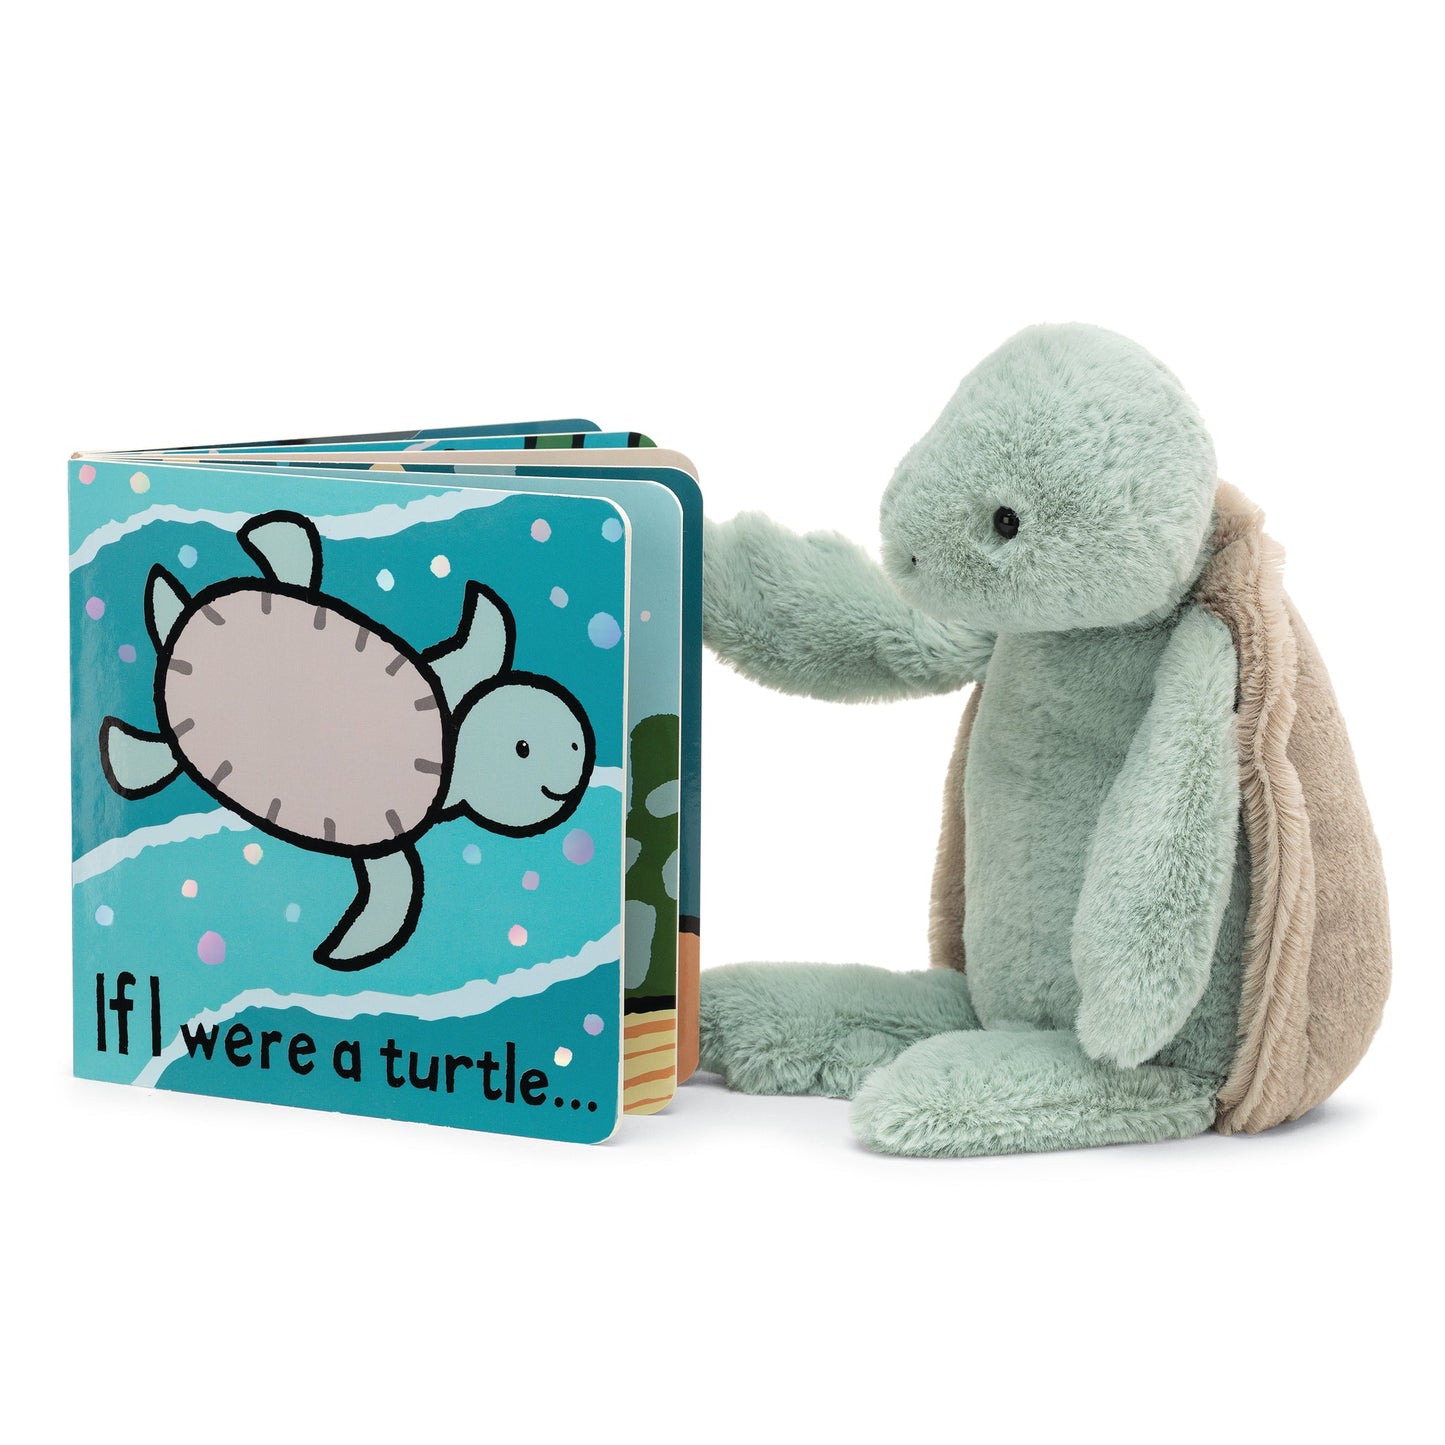 stuffed animal turtle reading the if I were a turtle book!